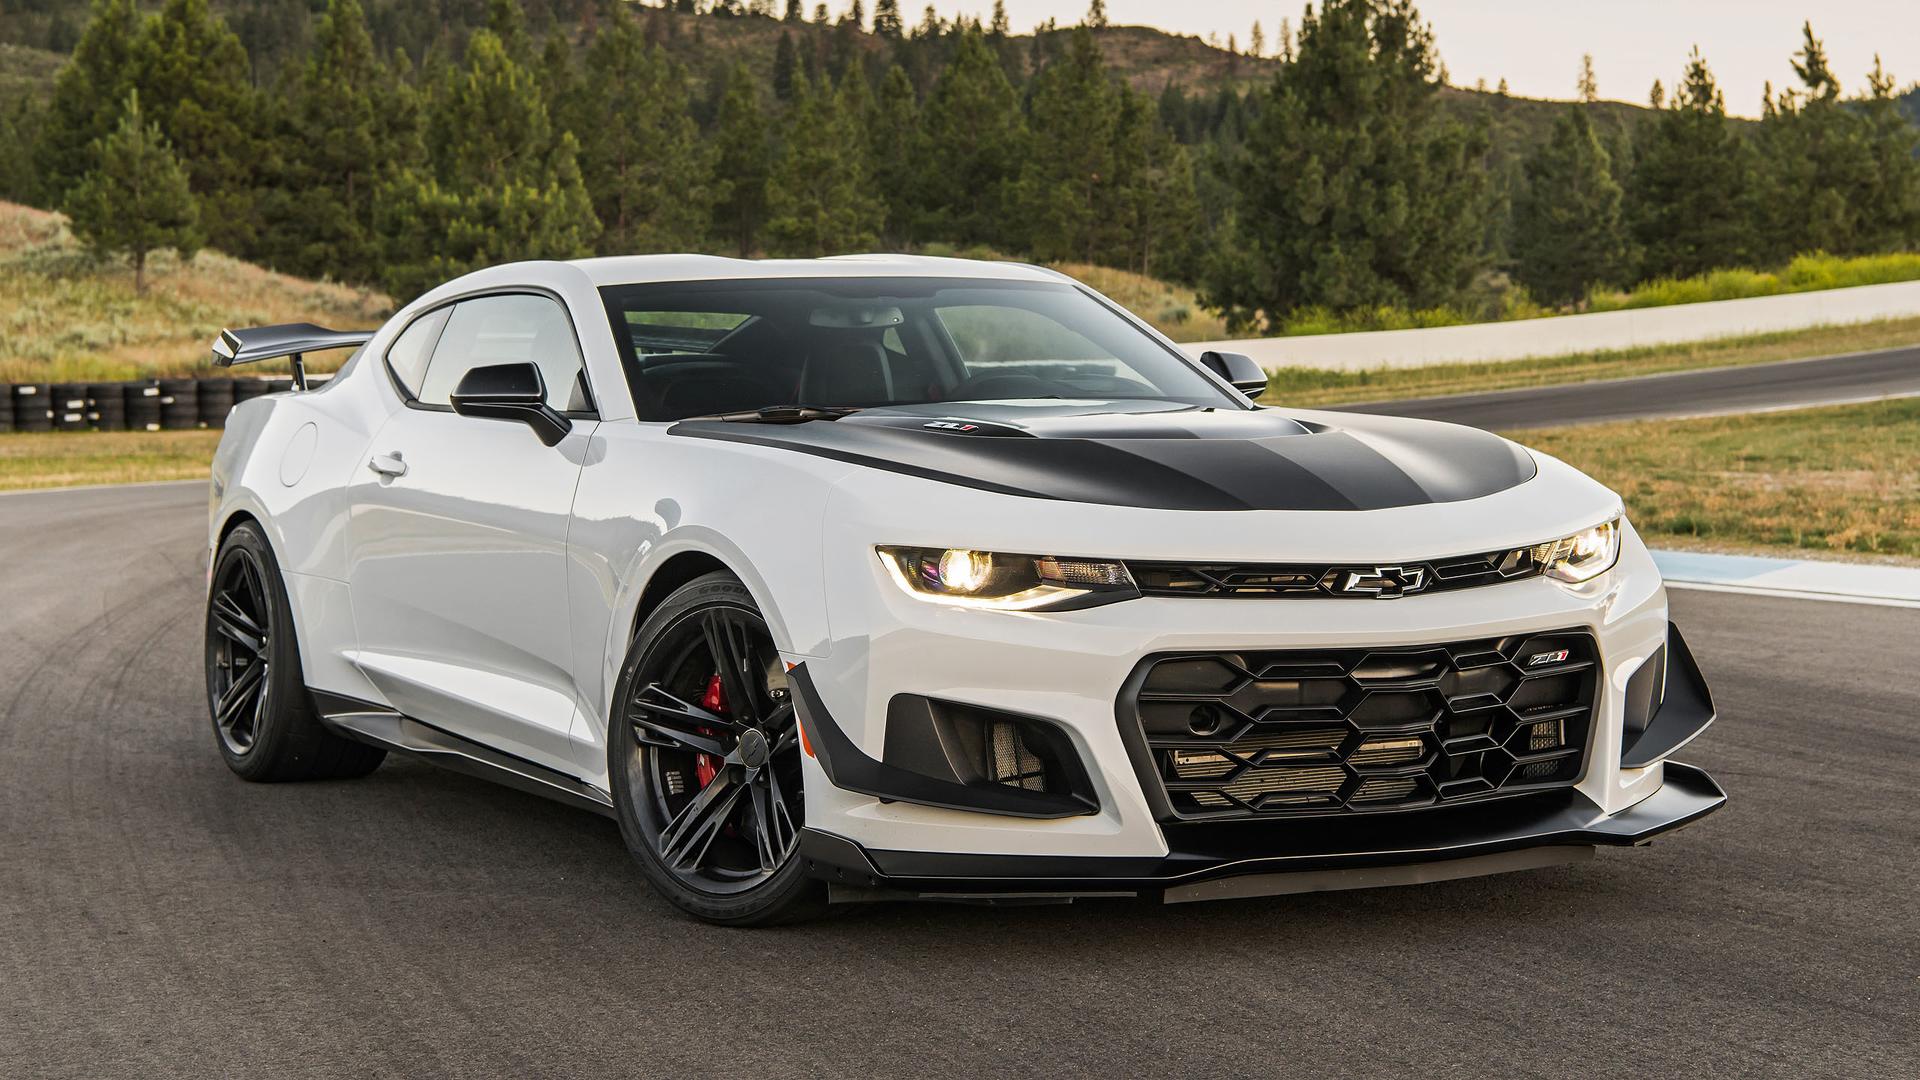 Wallpapers Chevrolet Camaro ZL1 8 Images